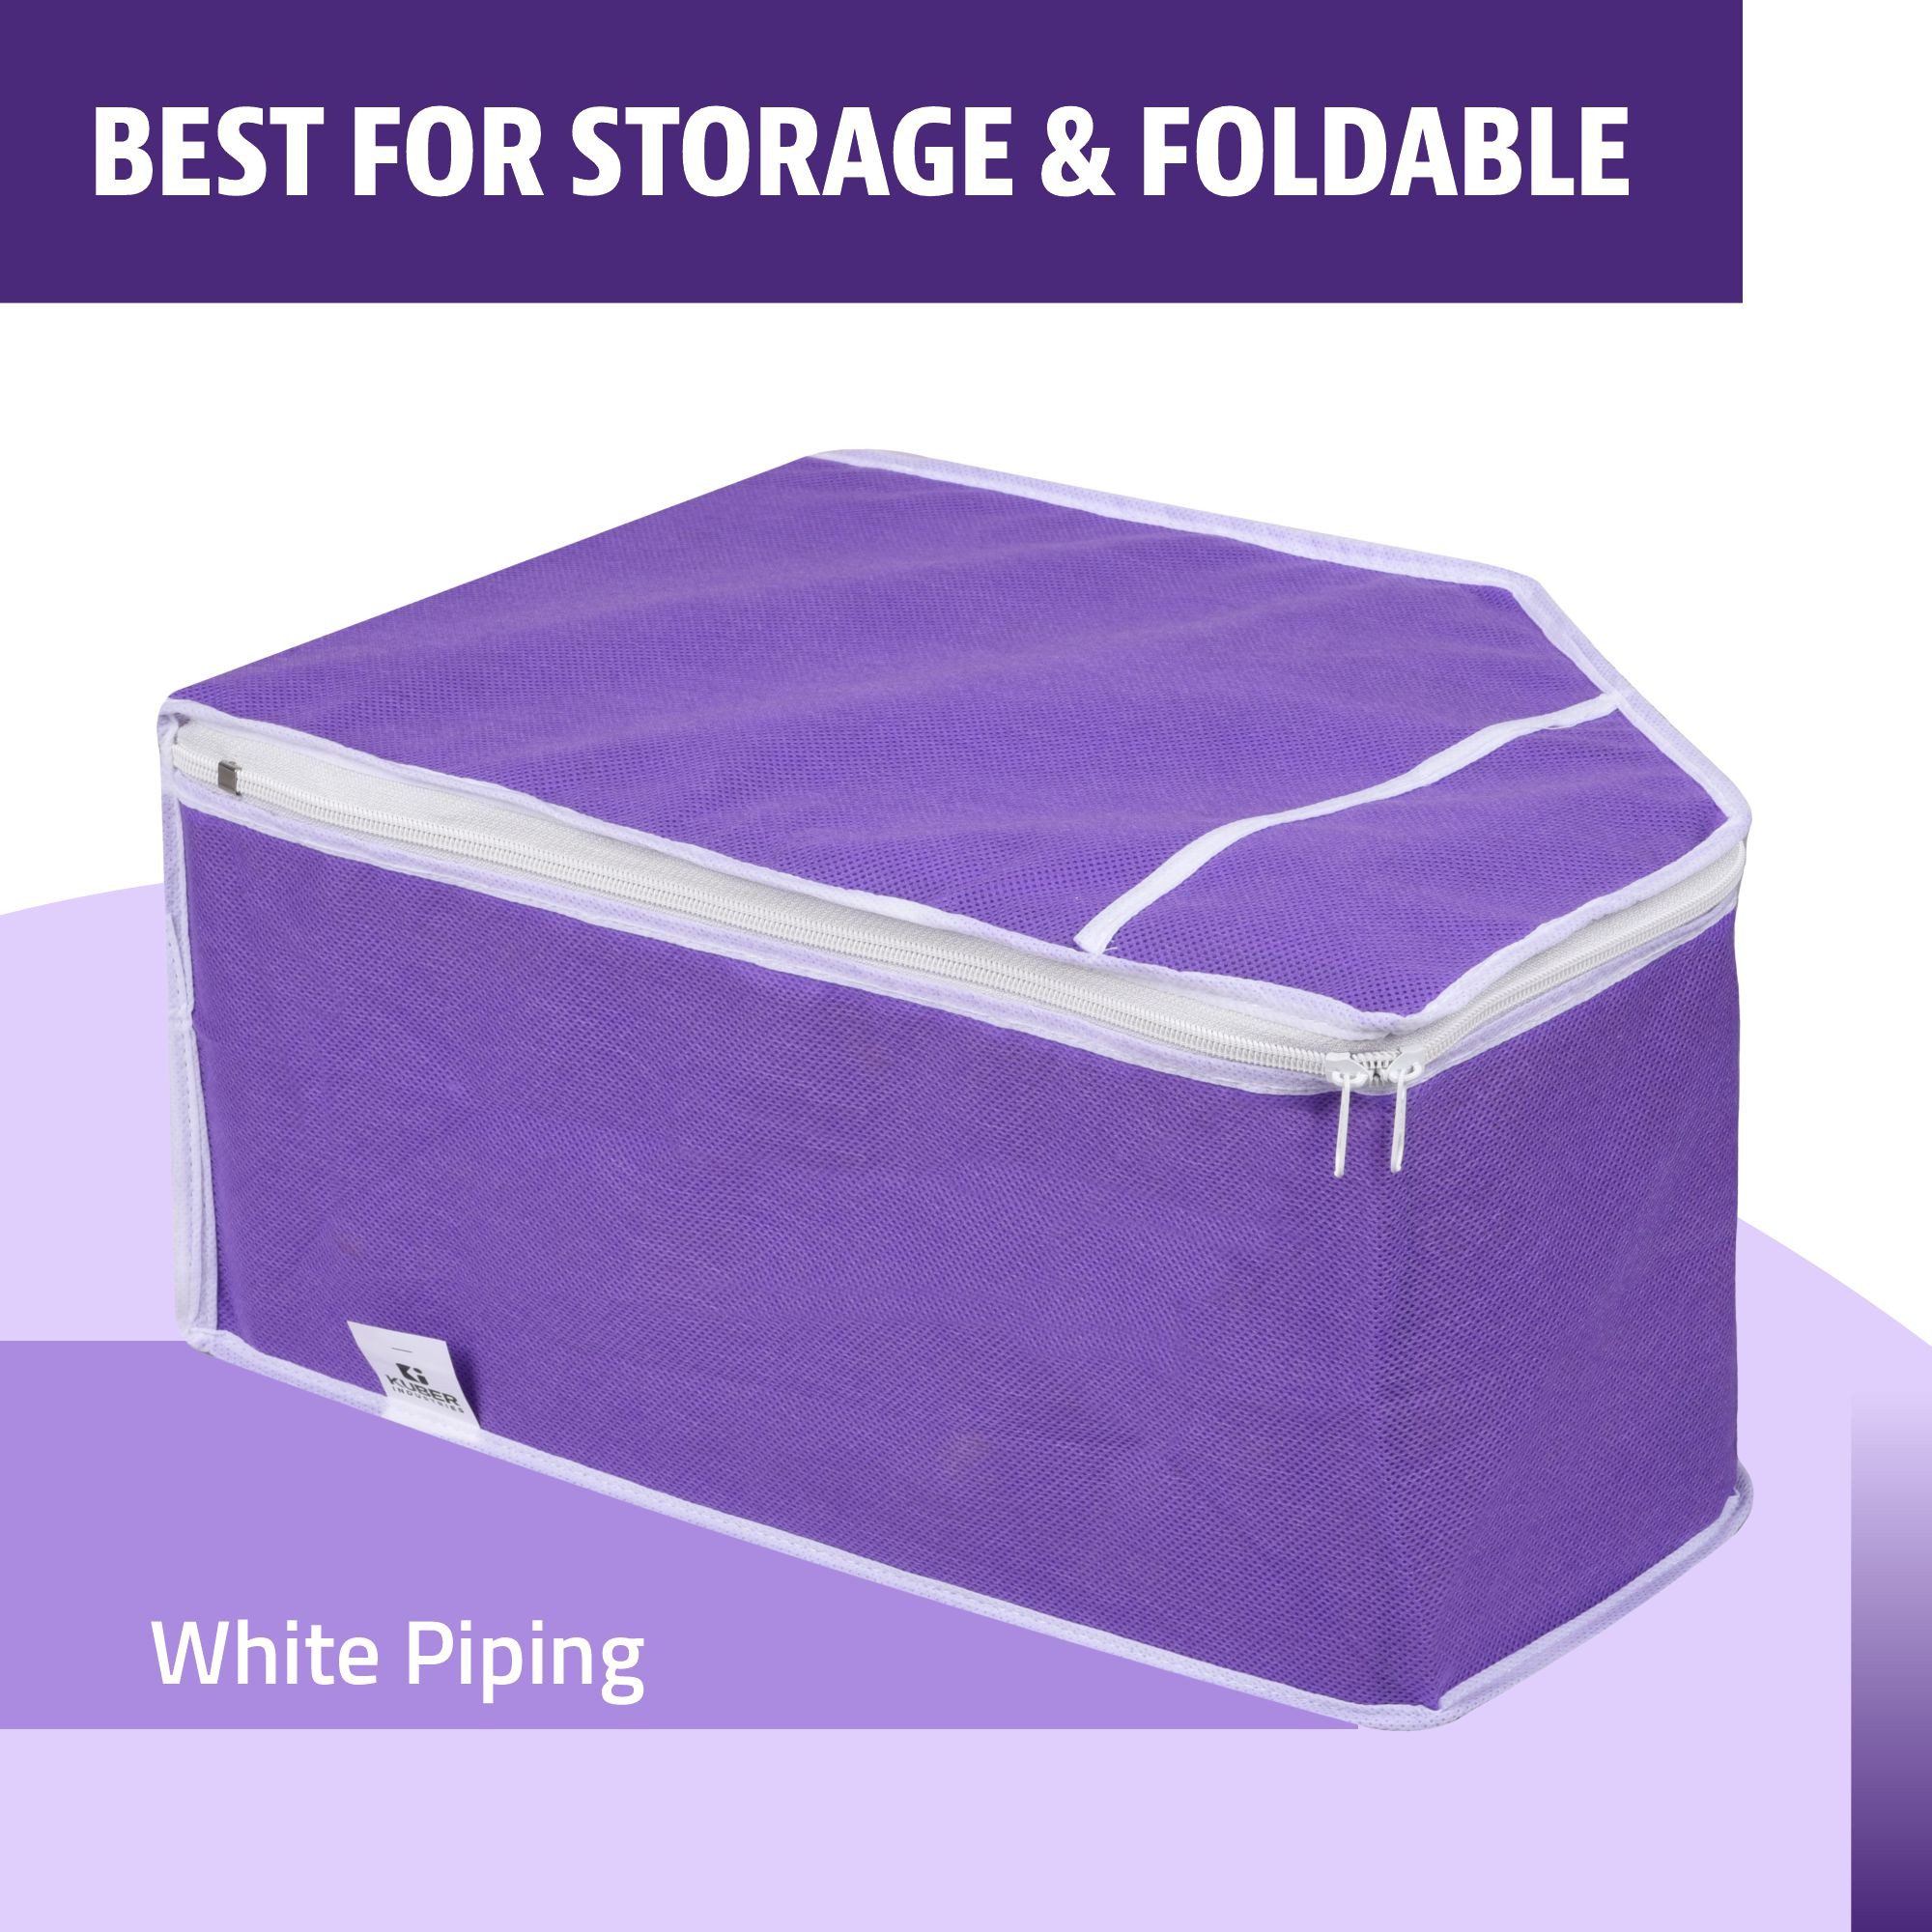 Kuber Industries Blouse Storage Bag | Clothes Storage Bag | Visible Window Wardrobe Bag | Clothes Organizer | Blouse Cover Bag for Travel | White Piping |Purple